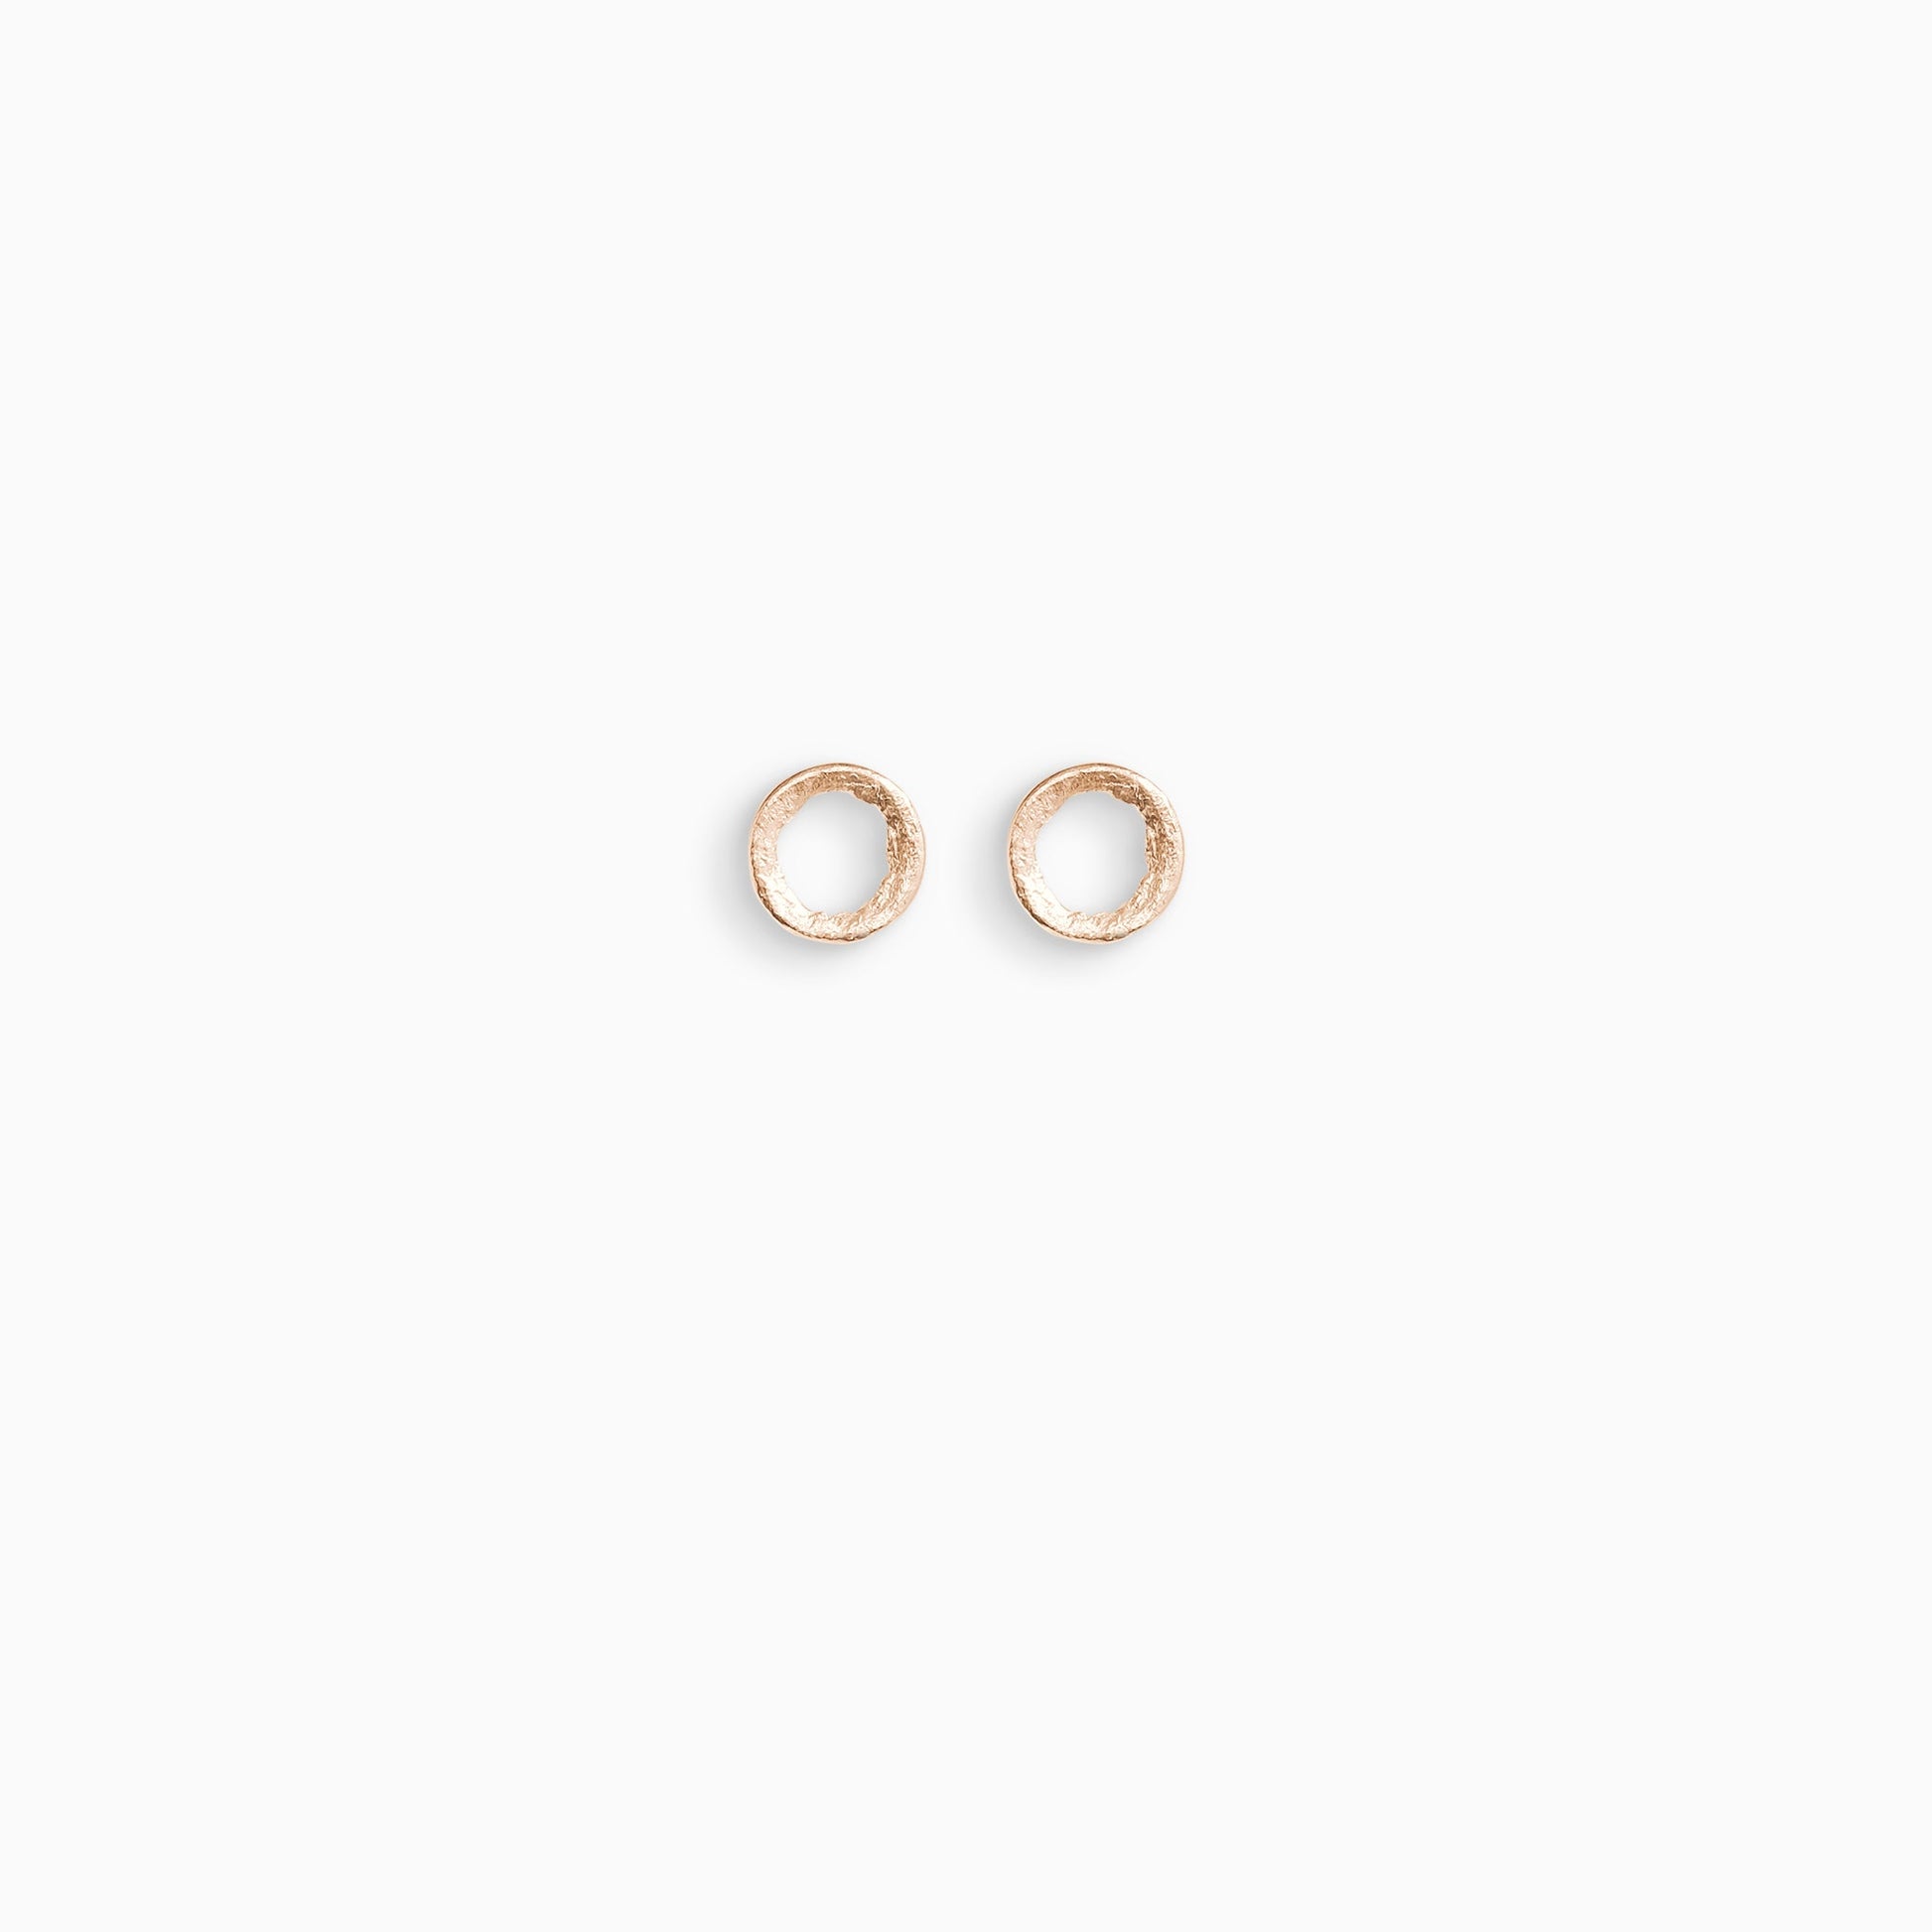 A pair of 18ct Fairtrade rose gold stud earrings, round in form with an open centre. Strong organic texture. Smooth outside edge, fragmented inside edges. 11mm outside diameter.